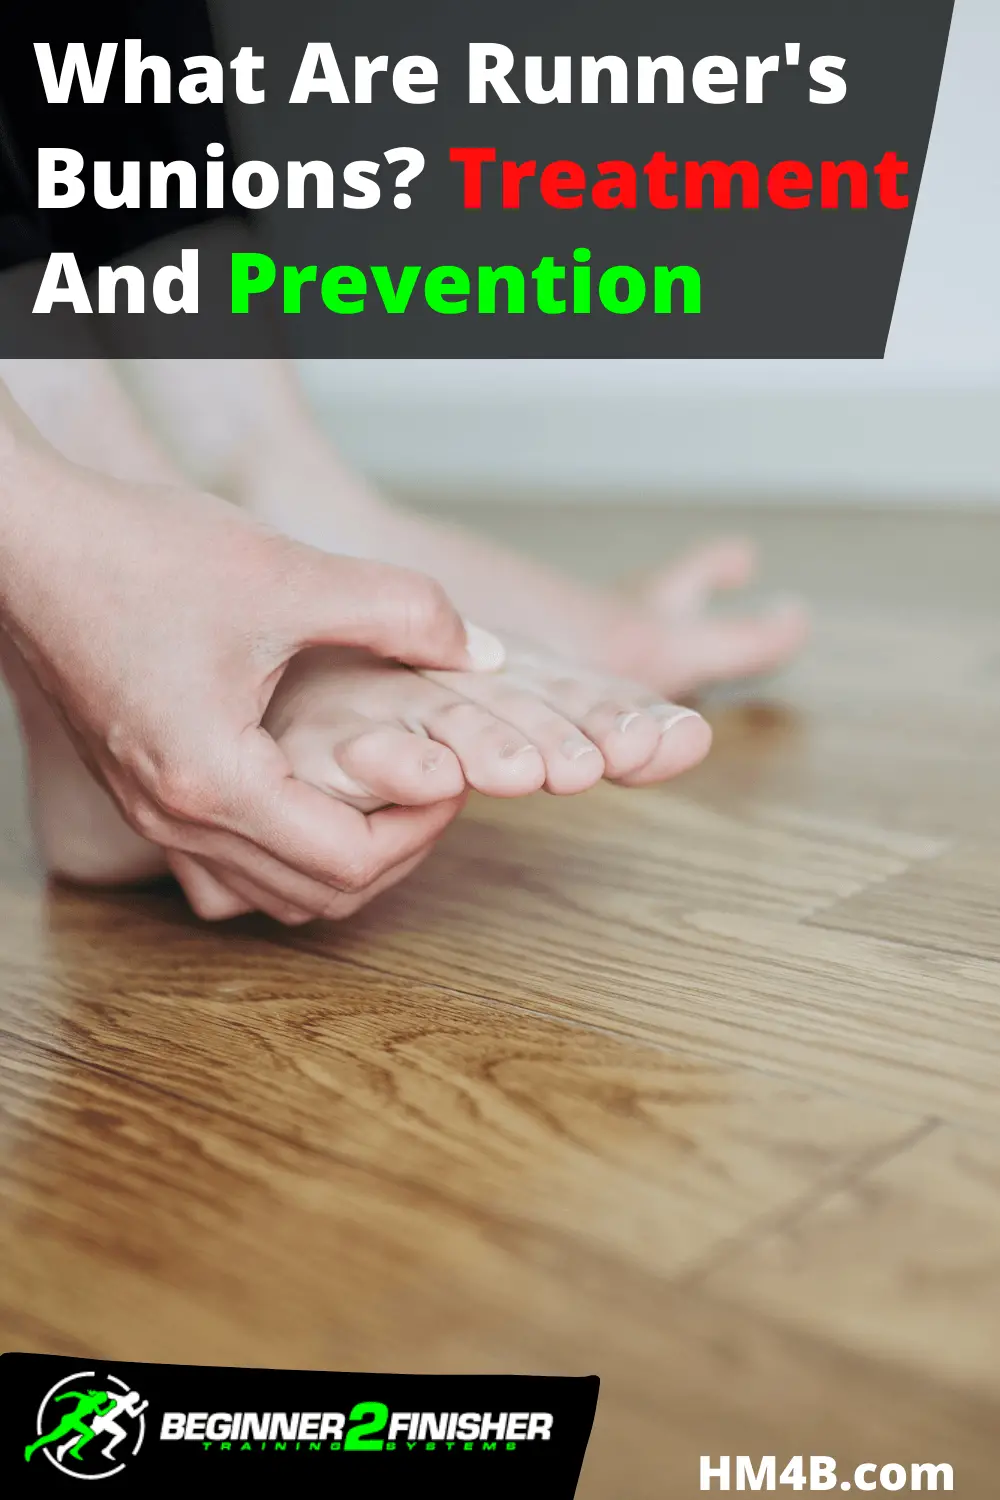 What Are Runner\'s Bunions - How Do I Treat And Prevent Them?